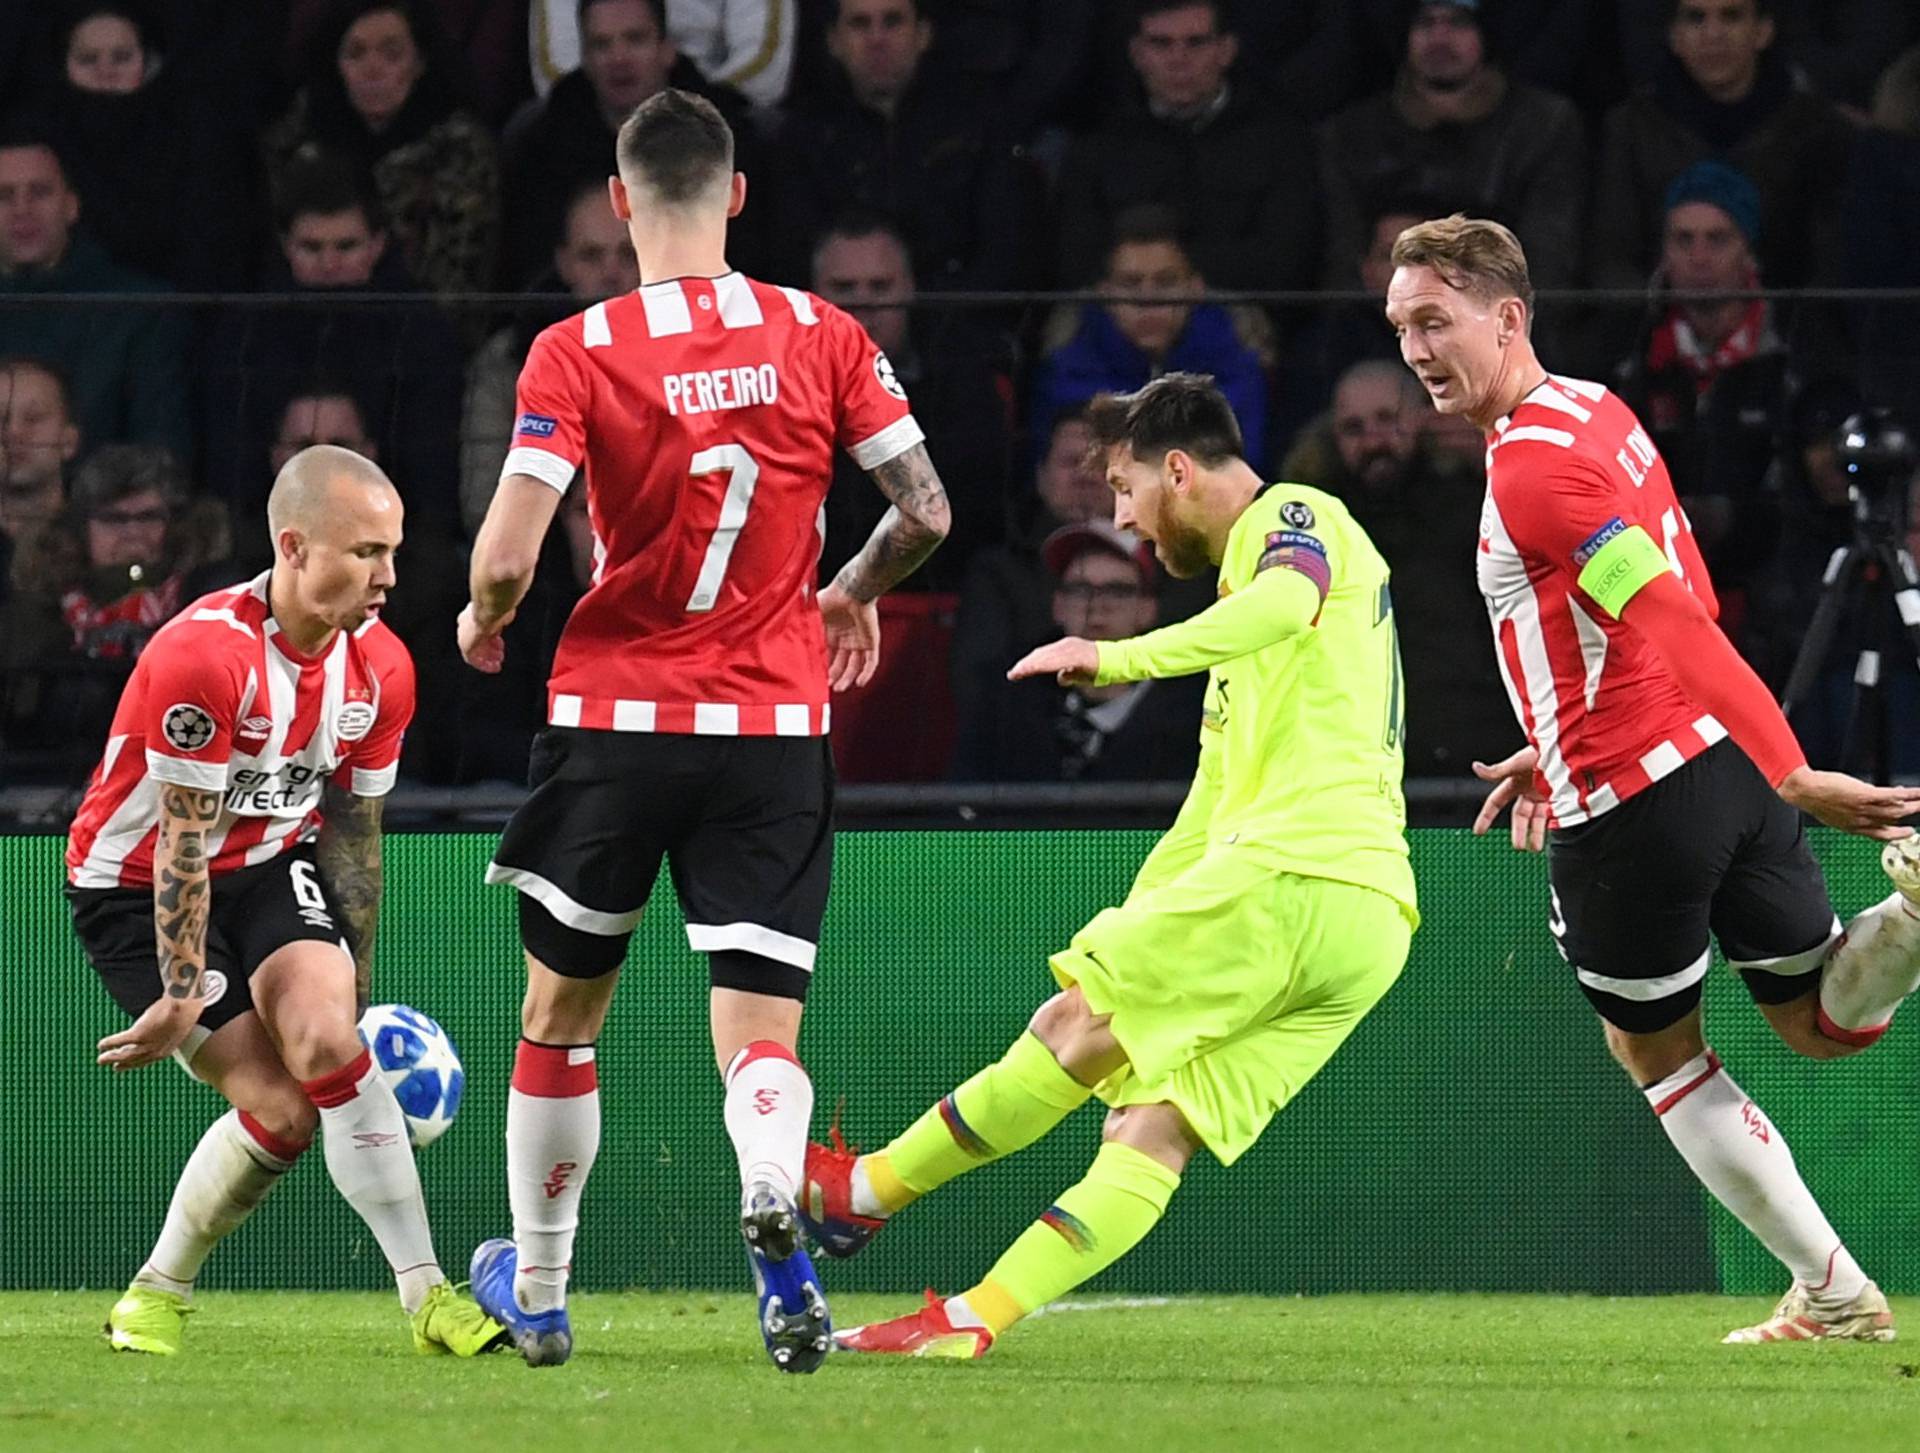 Champions League - Group Stage - Group B - PSV Eindhoven v FC Barcelona